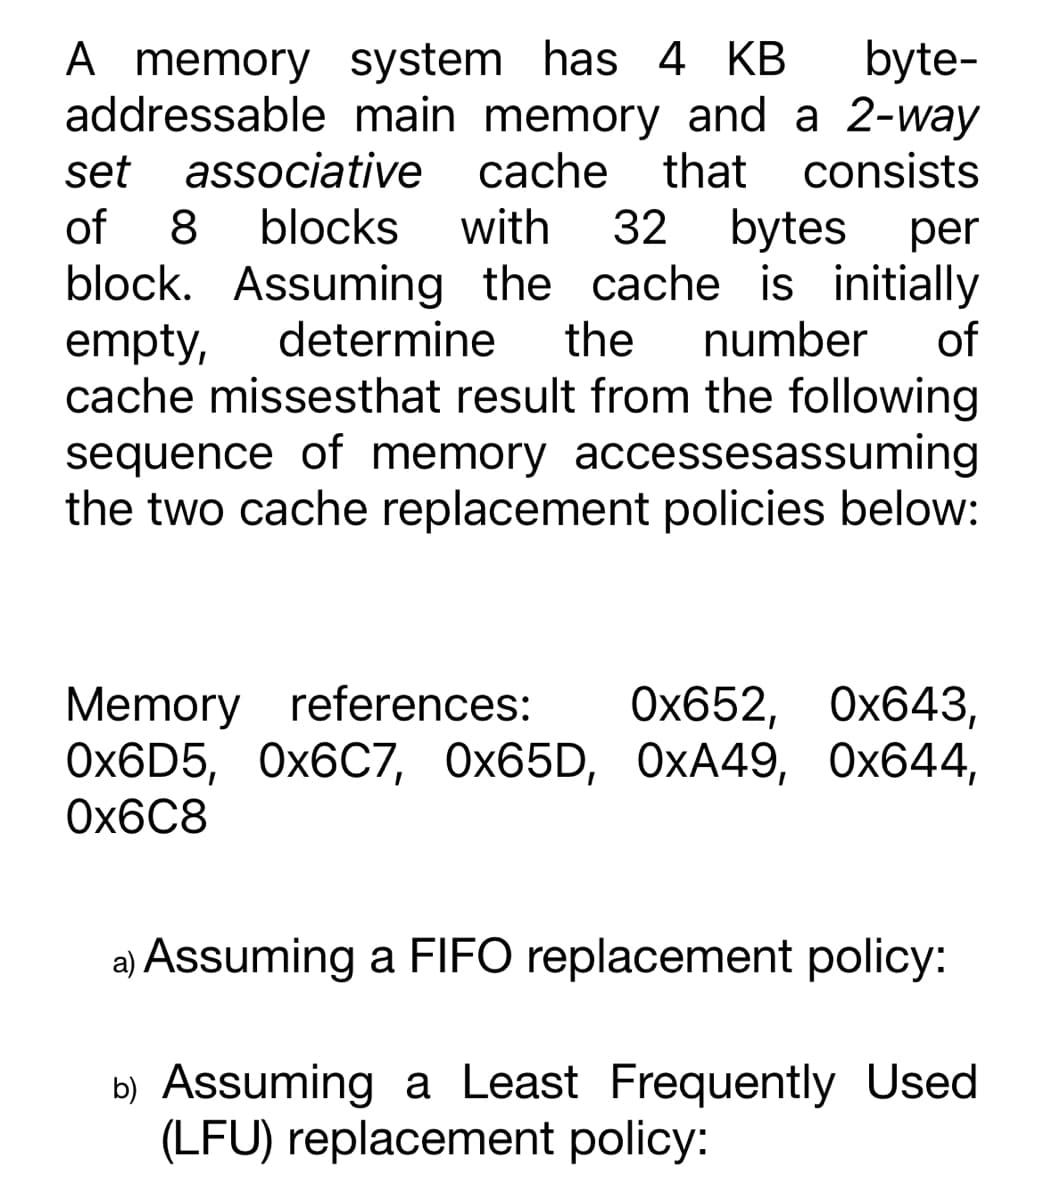 byte-
A memory system has 4 KB
addressable main memory and a 2-way
set associative cache that consists
of 8 blocks with 32 bytes per
block. Assuming the cache is initially
empty, determine the number of
cache missesthat result from the following
sequence of memory accessesassuming
the two cache replacement policies below:
Memory references: 0x652, 0x643,
0x6D5, 0x6C7, 0x65D, OxA49, 0x644,
0x6C8
a) Assuming a FIFO replacement policy:
b) Assuming a Least Frequently Used
(LFU) replacement policy: